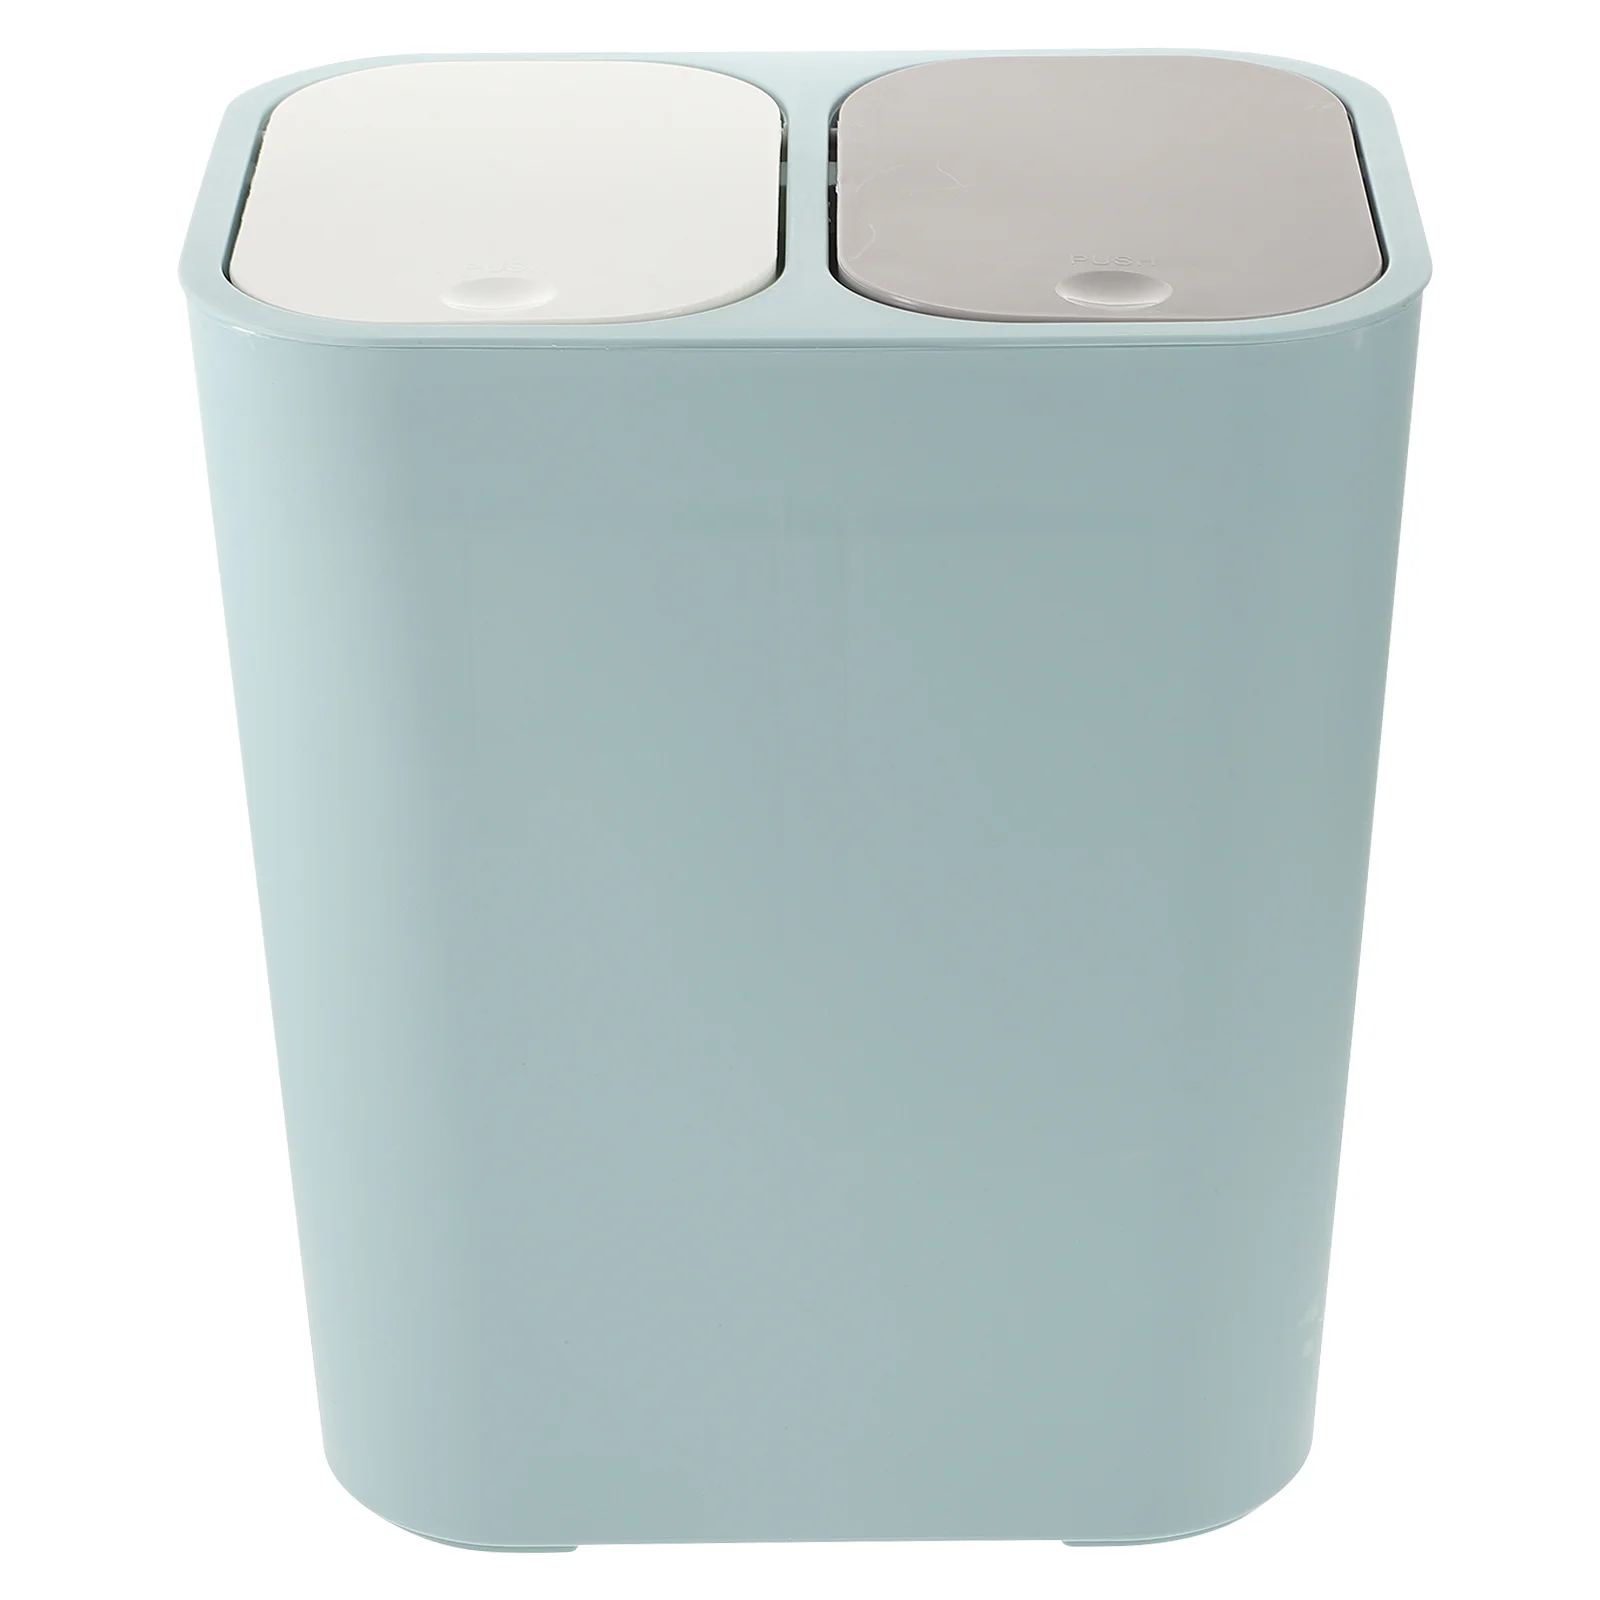 

Bathroom Garbage Can With Lid Lid Dual Compartment Garbage Can Classified Recycling Bin Rectangular Trash Containers Waste Bin